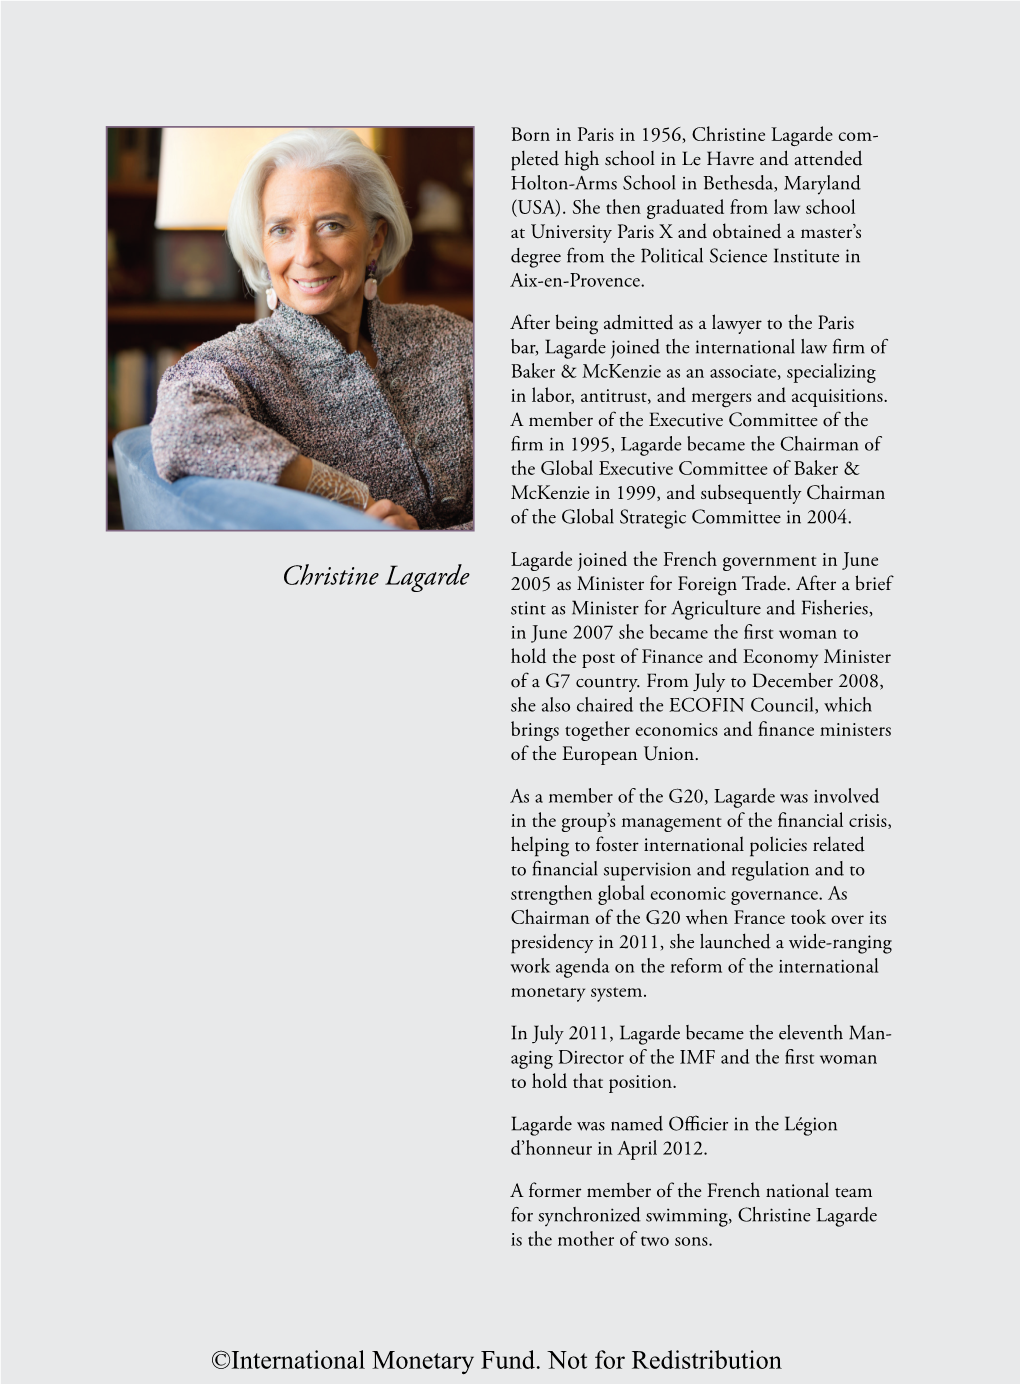 Christine Lagarde Com- Pleted High School in Le Havre and Attended Holton-Arms School in Bethesda, Maryland (USA)